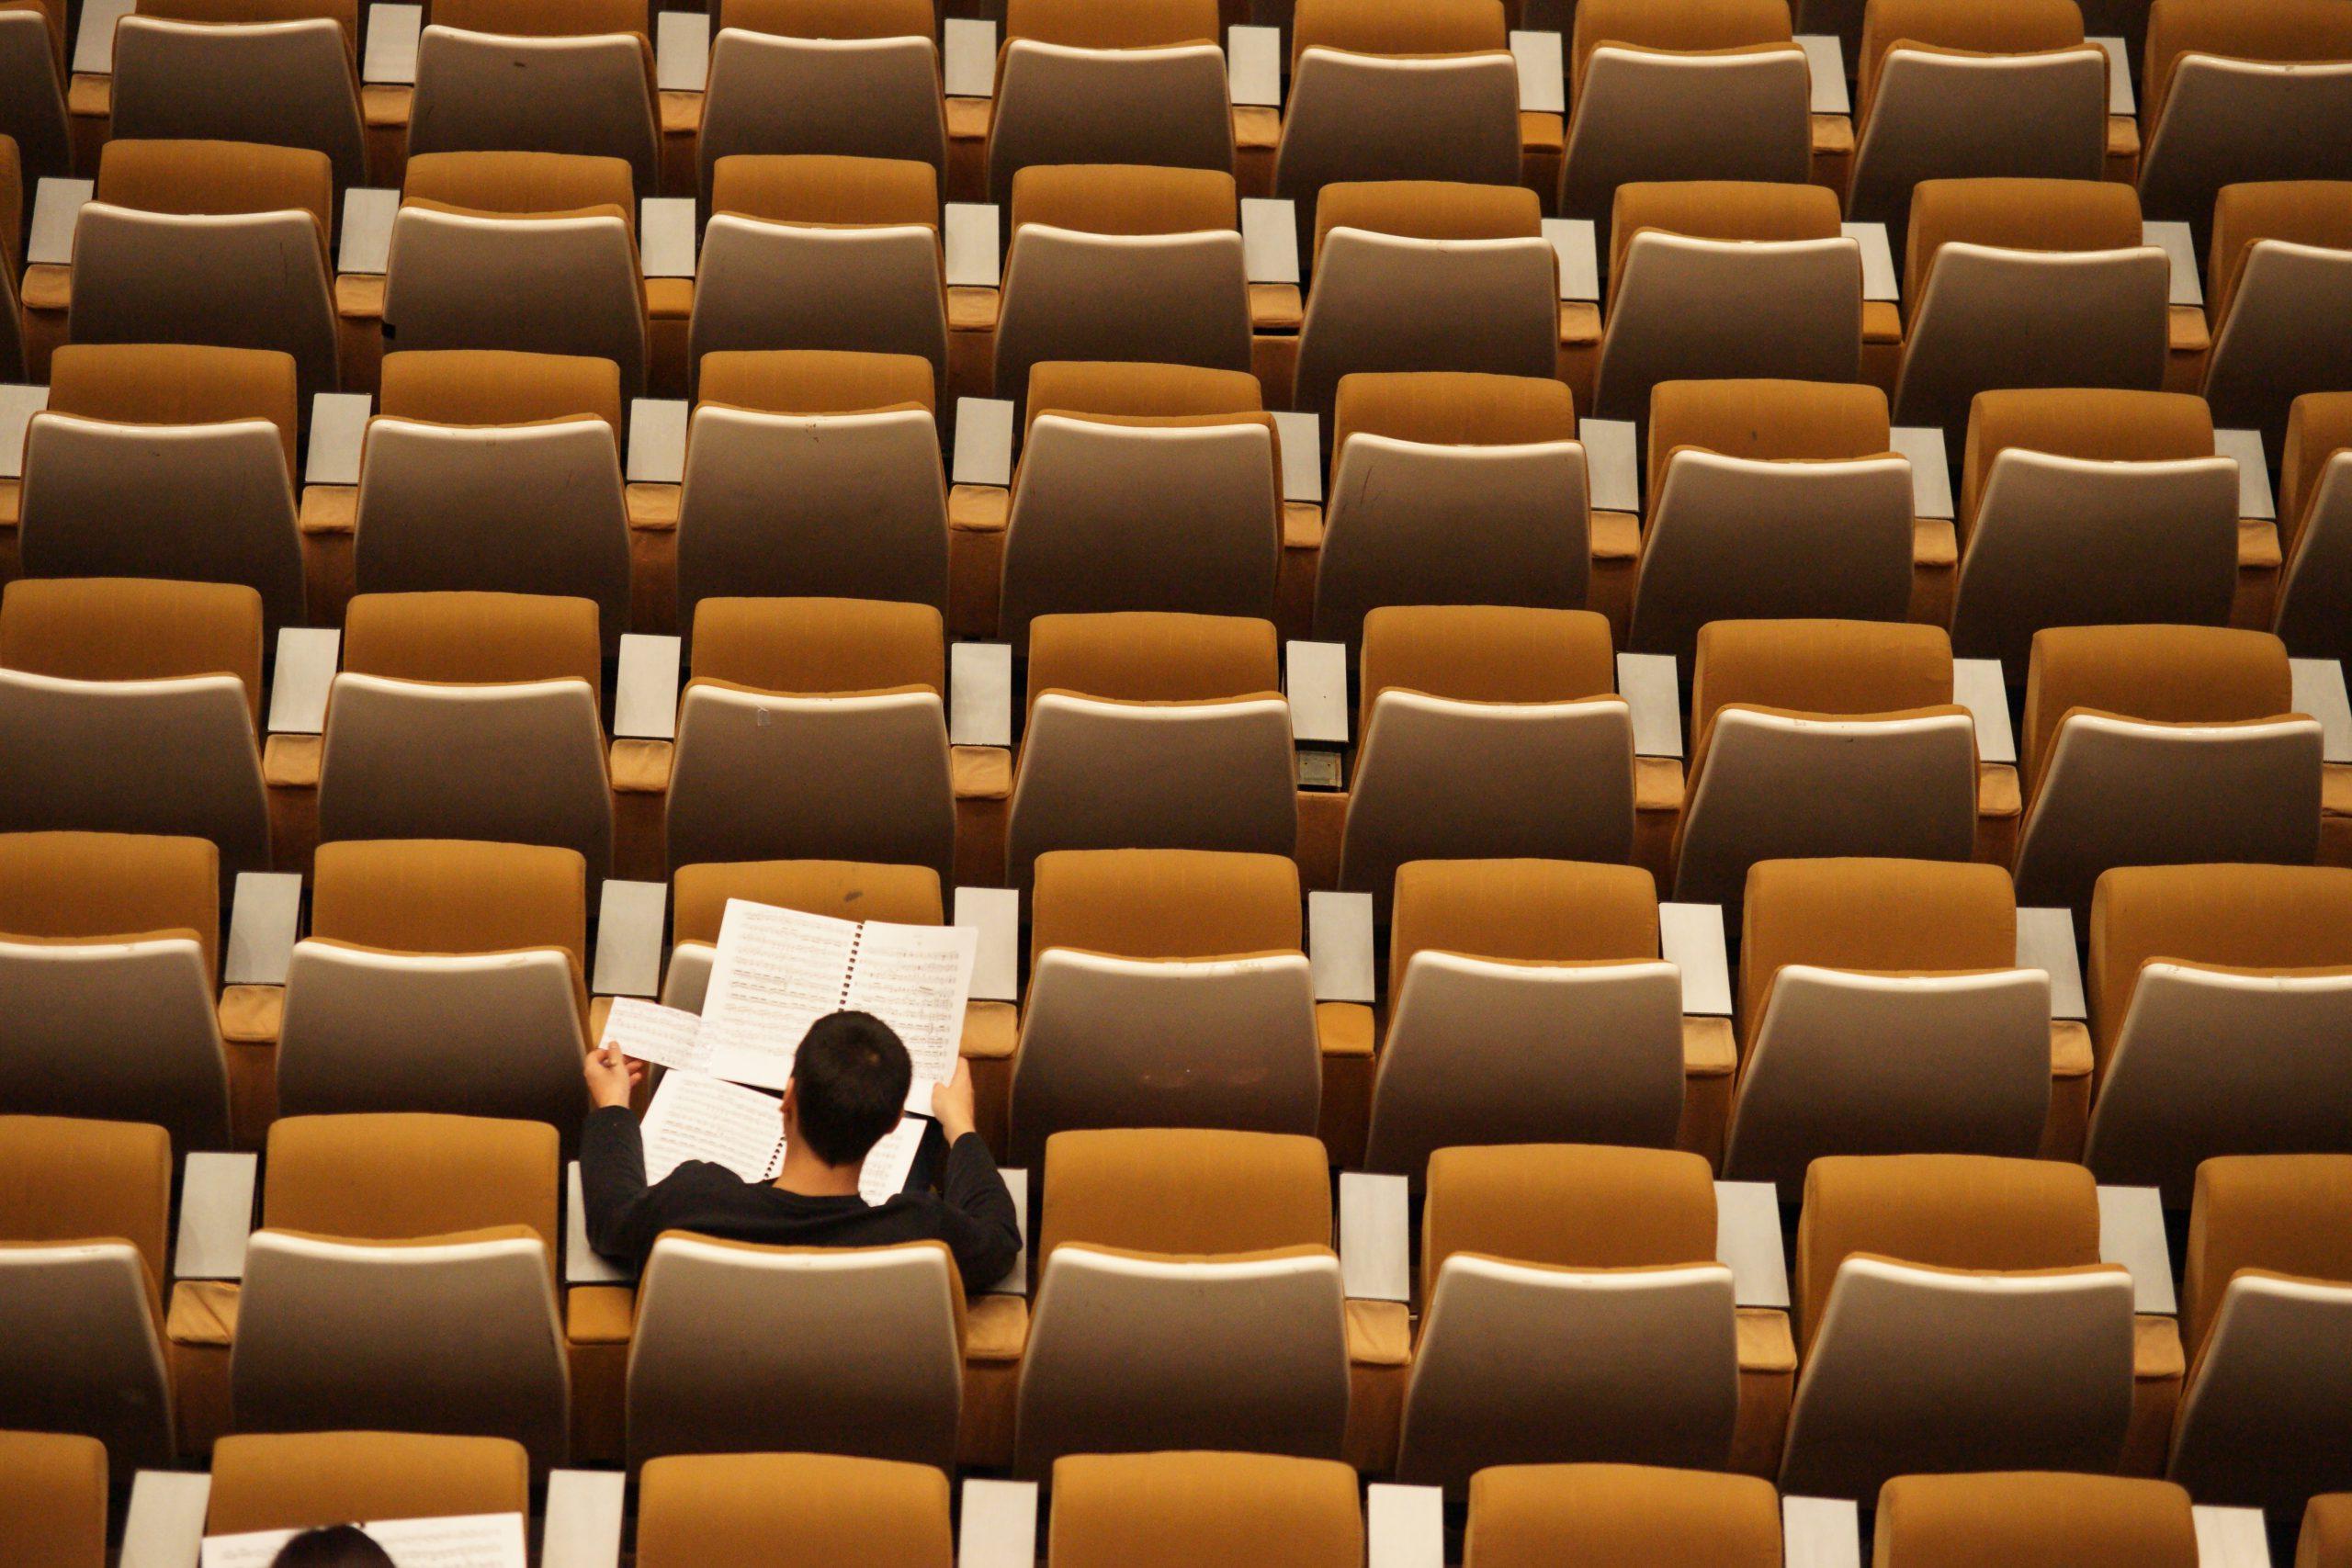 A person sitting in an auditorium by themselves